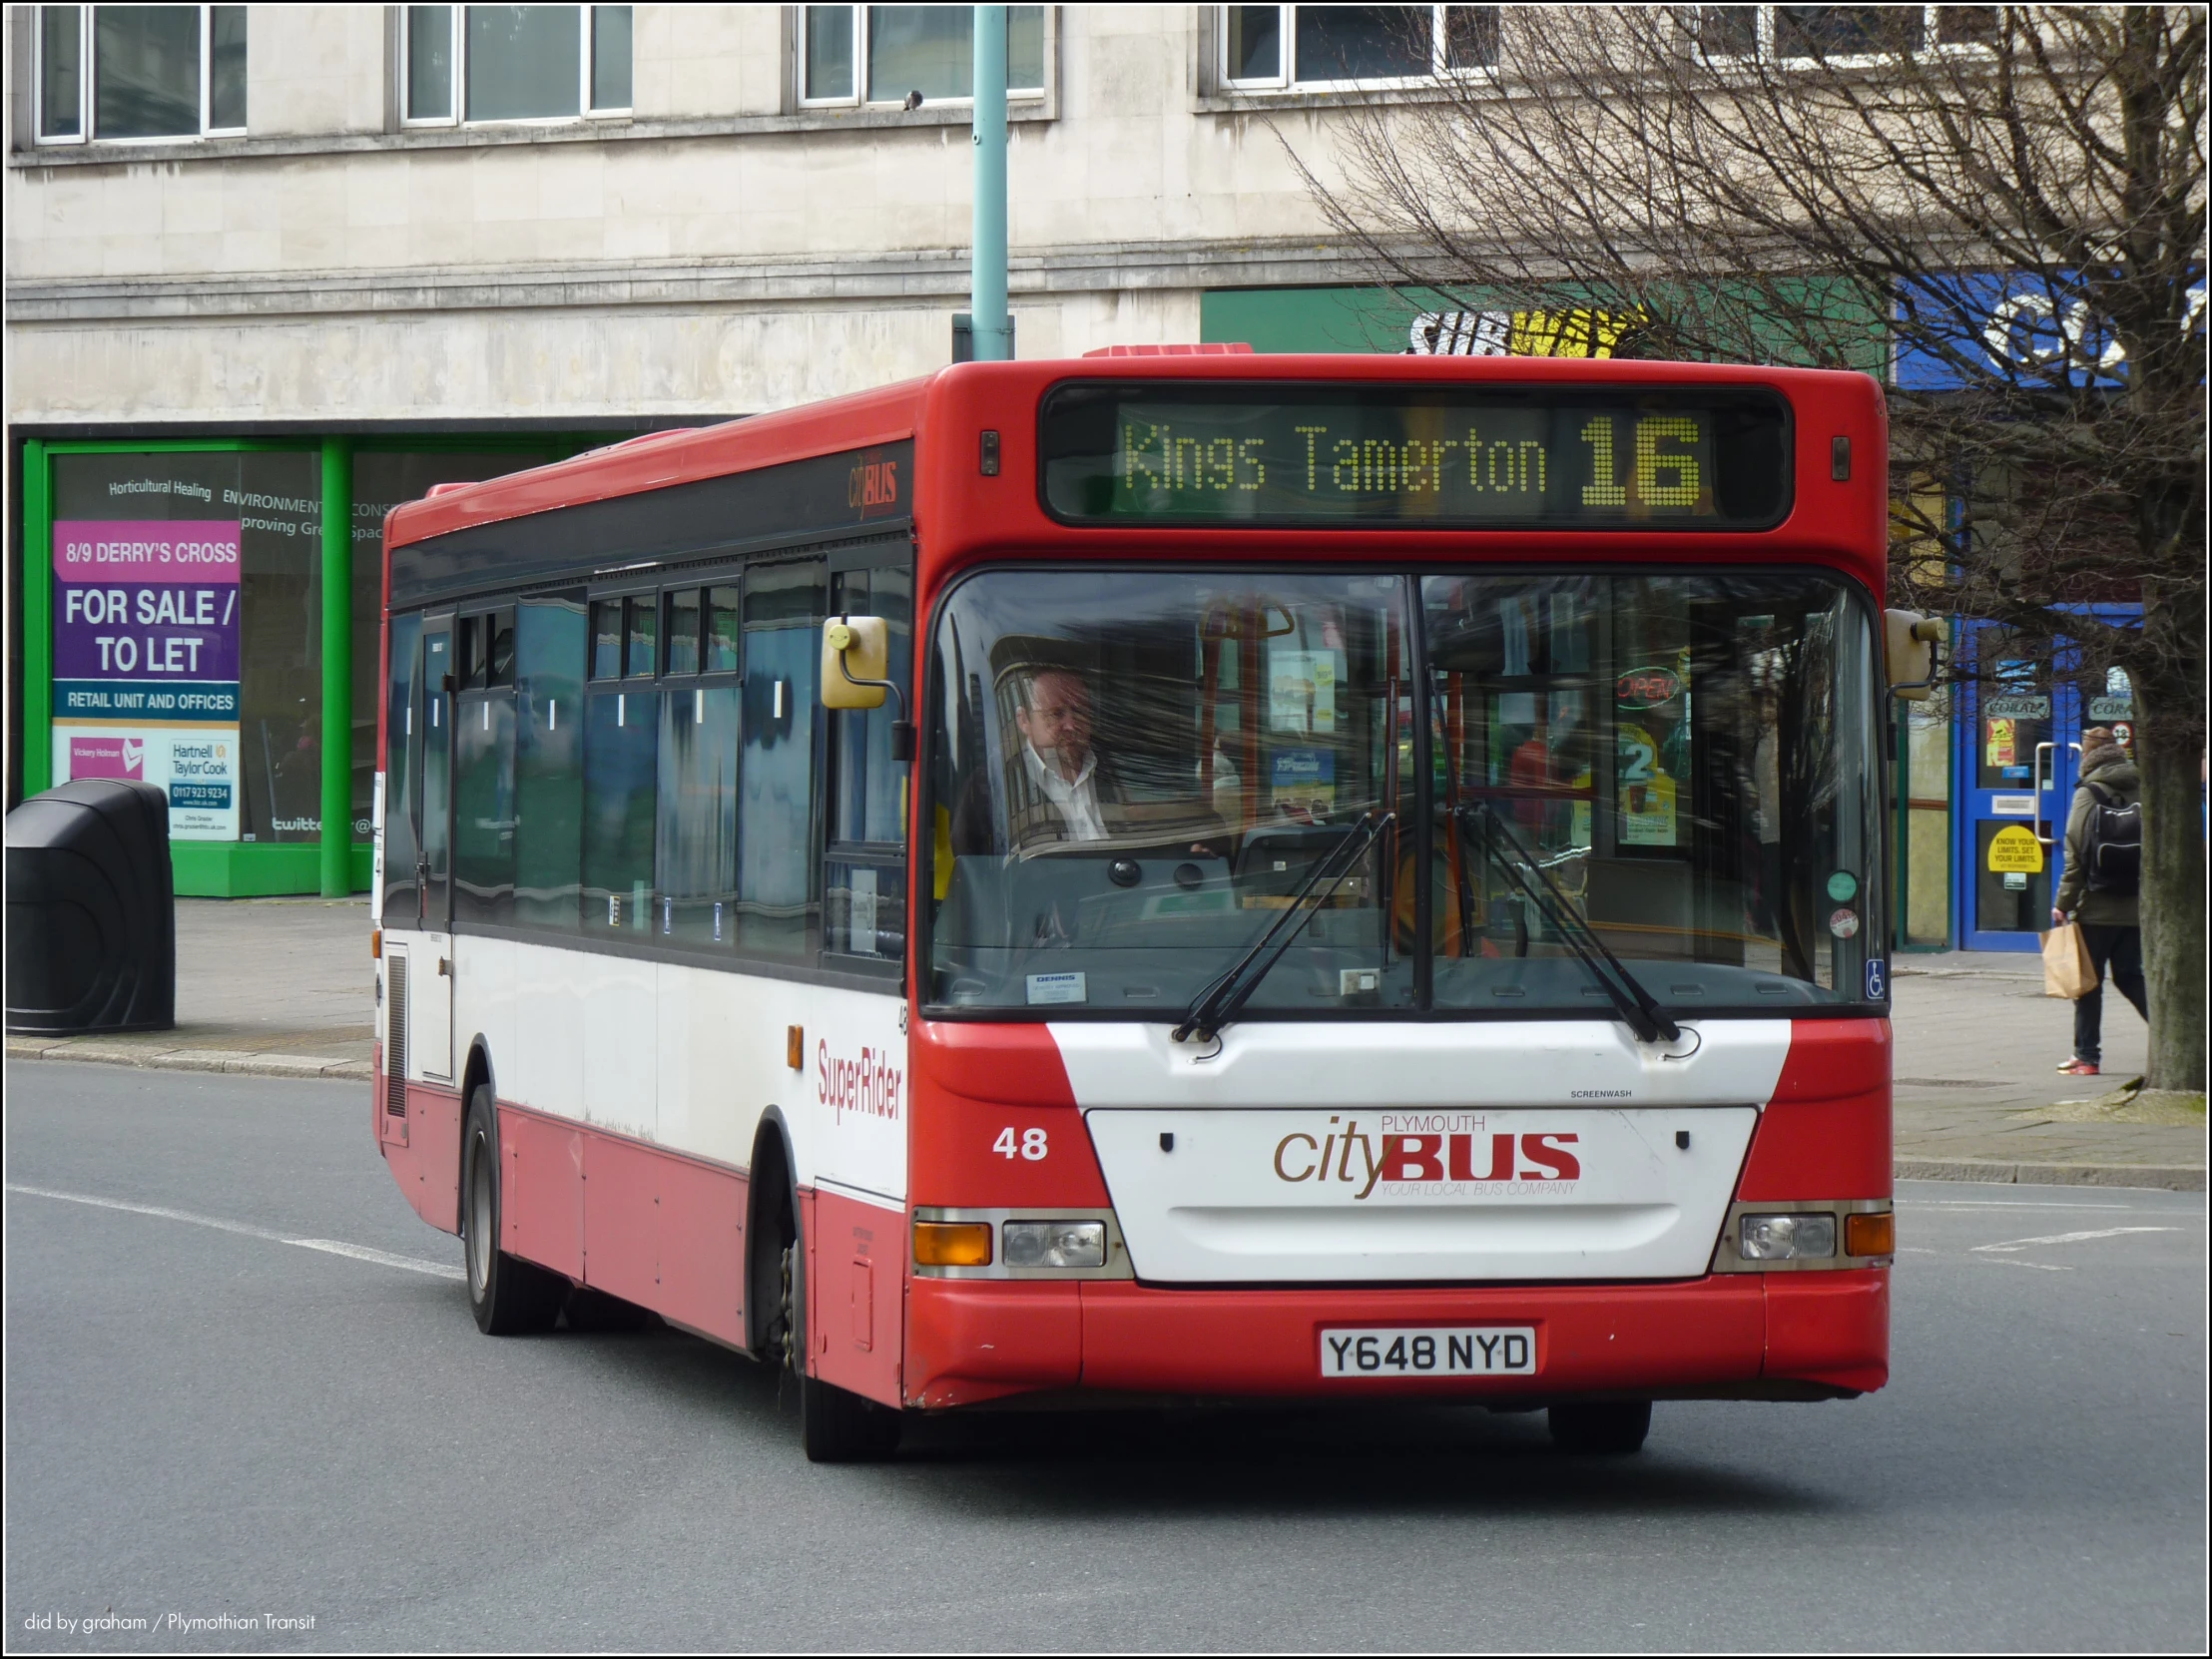 a passenger bus on the street near some buildings